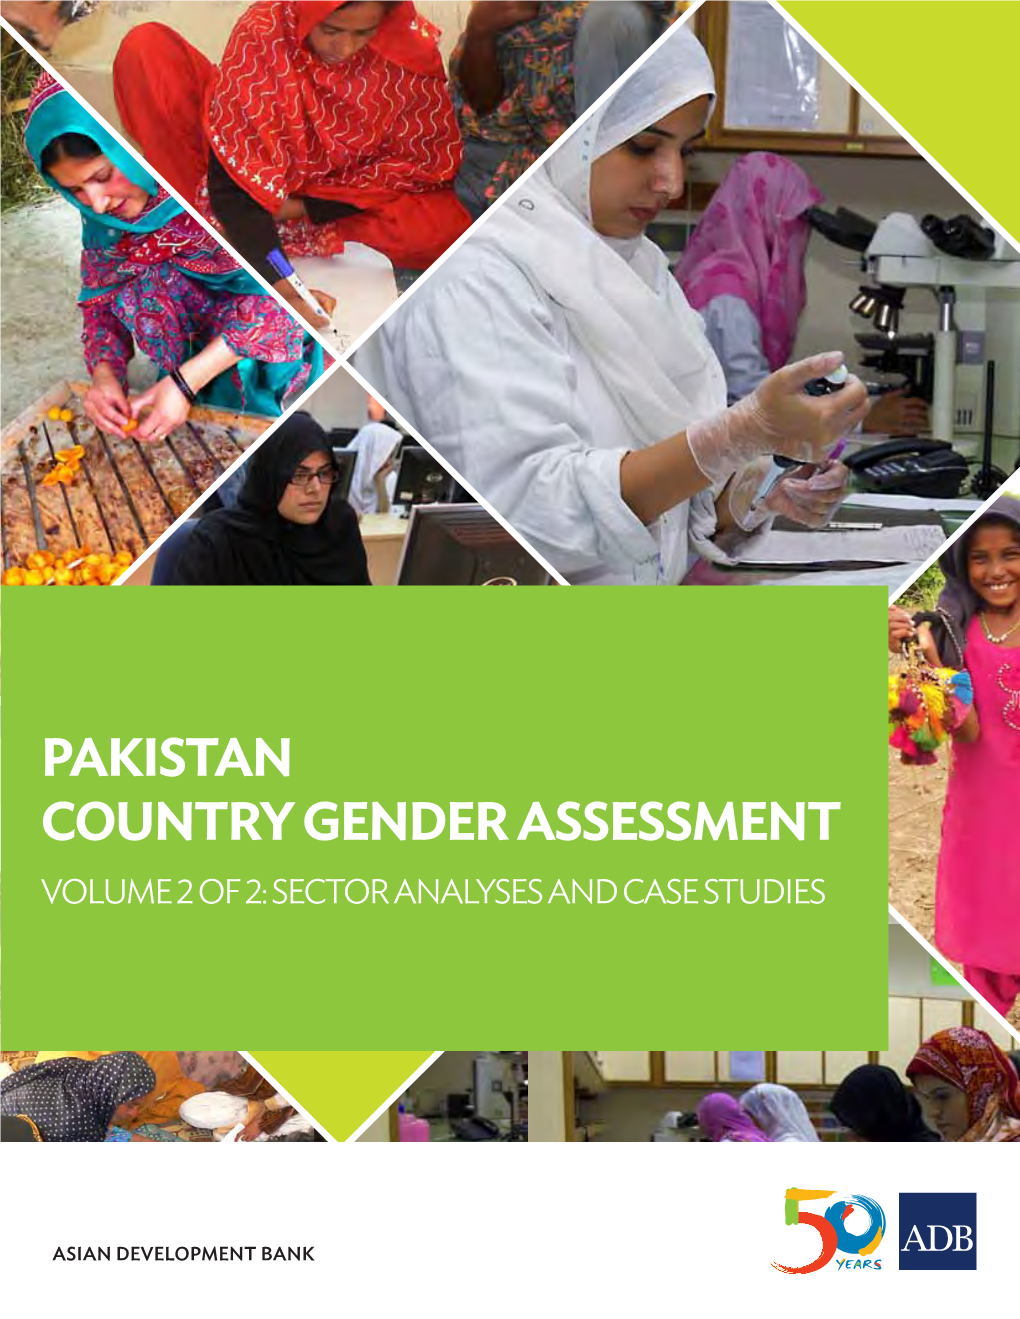 Pakistan Country Gender Assessment—Volume 2 of 2: Sector Analyses and Case Studies